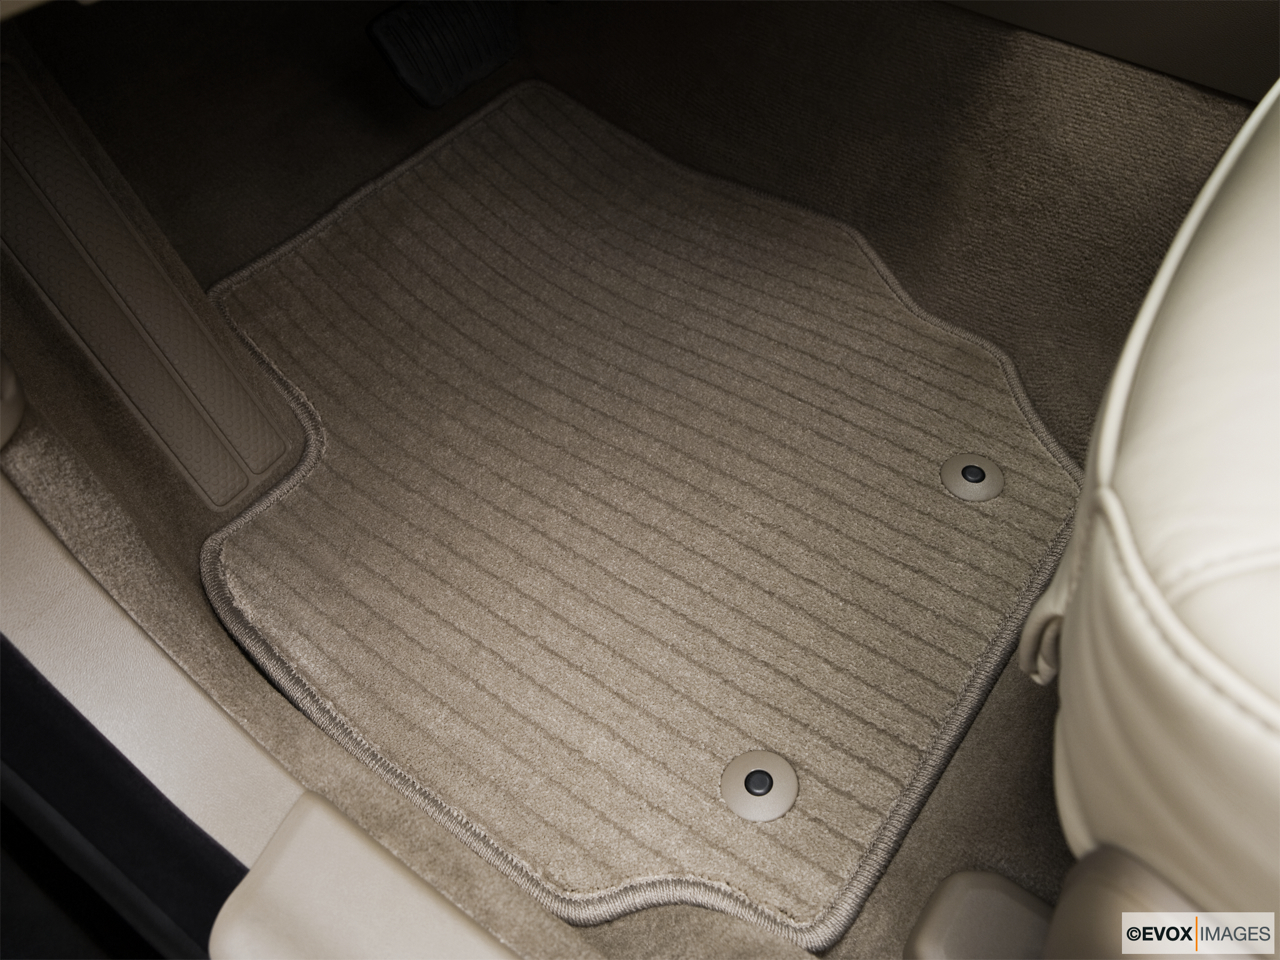 2010 Volvo S80 3.2 Driver's floor mat and pedals. Mid-seat level from outside looking in. 